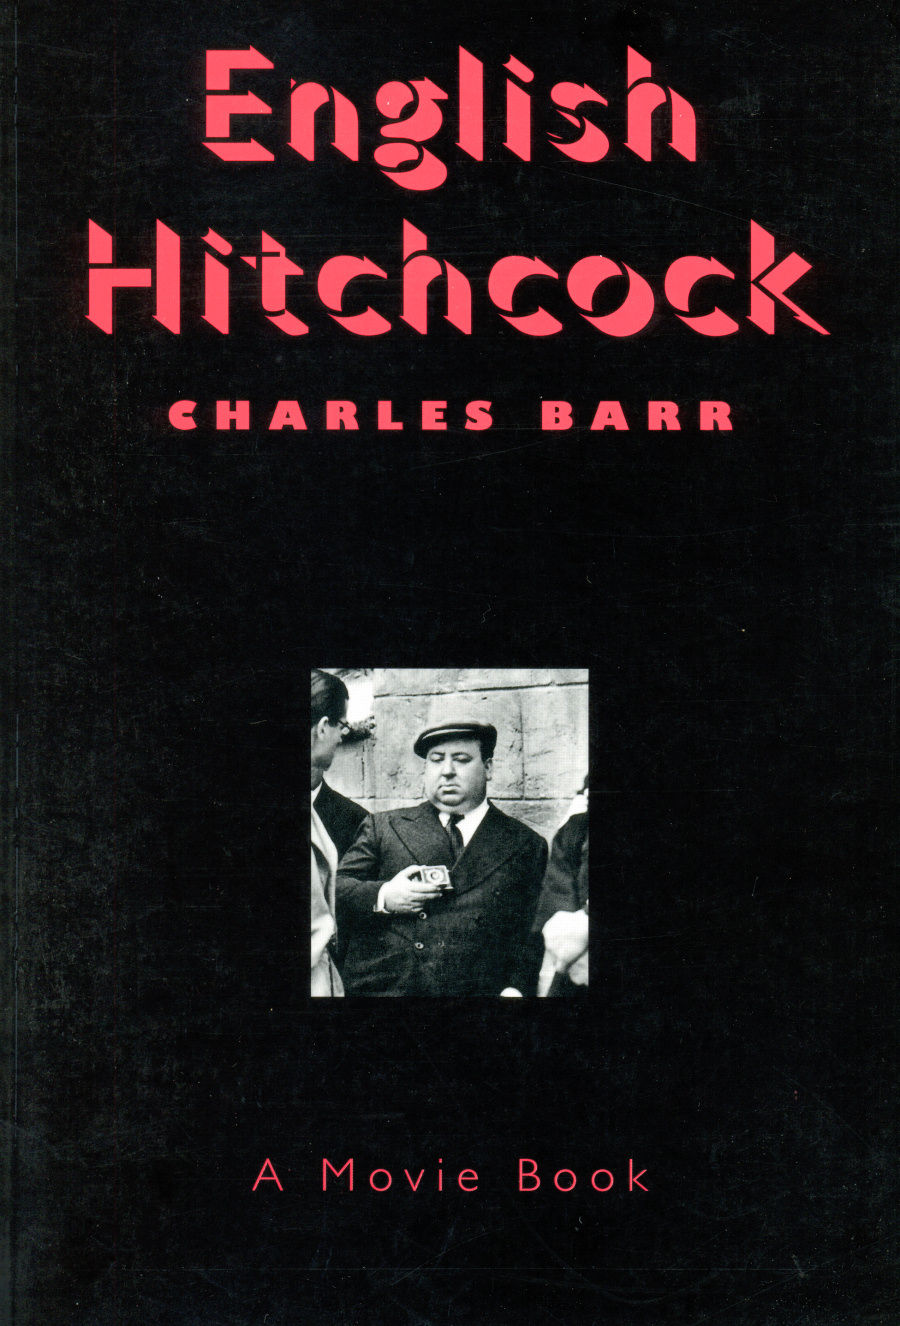 English Hitchcock (1999) book by Charles Barr